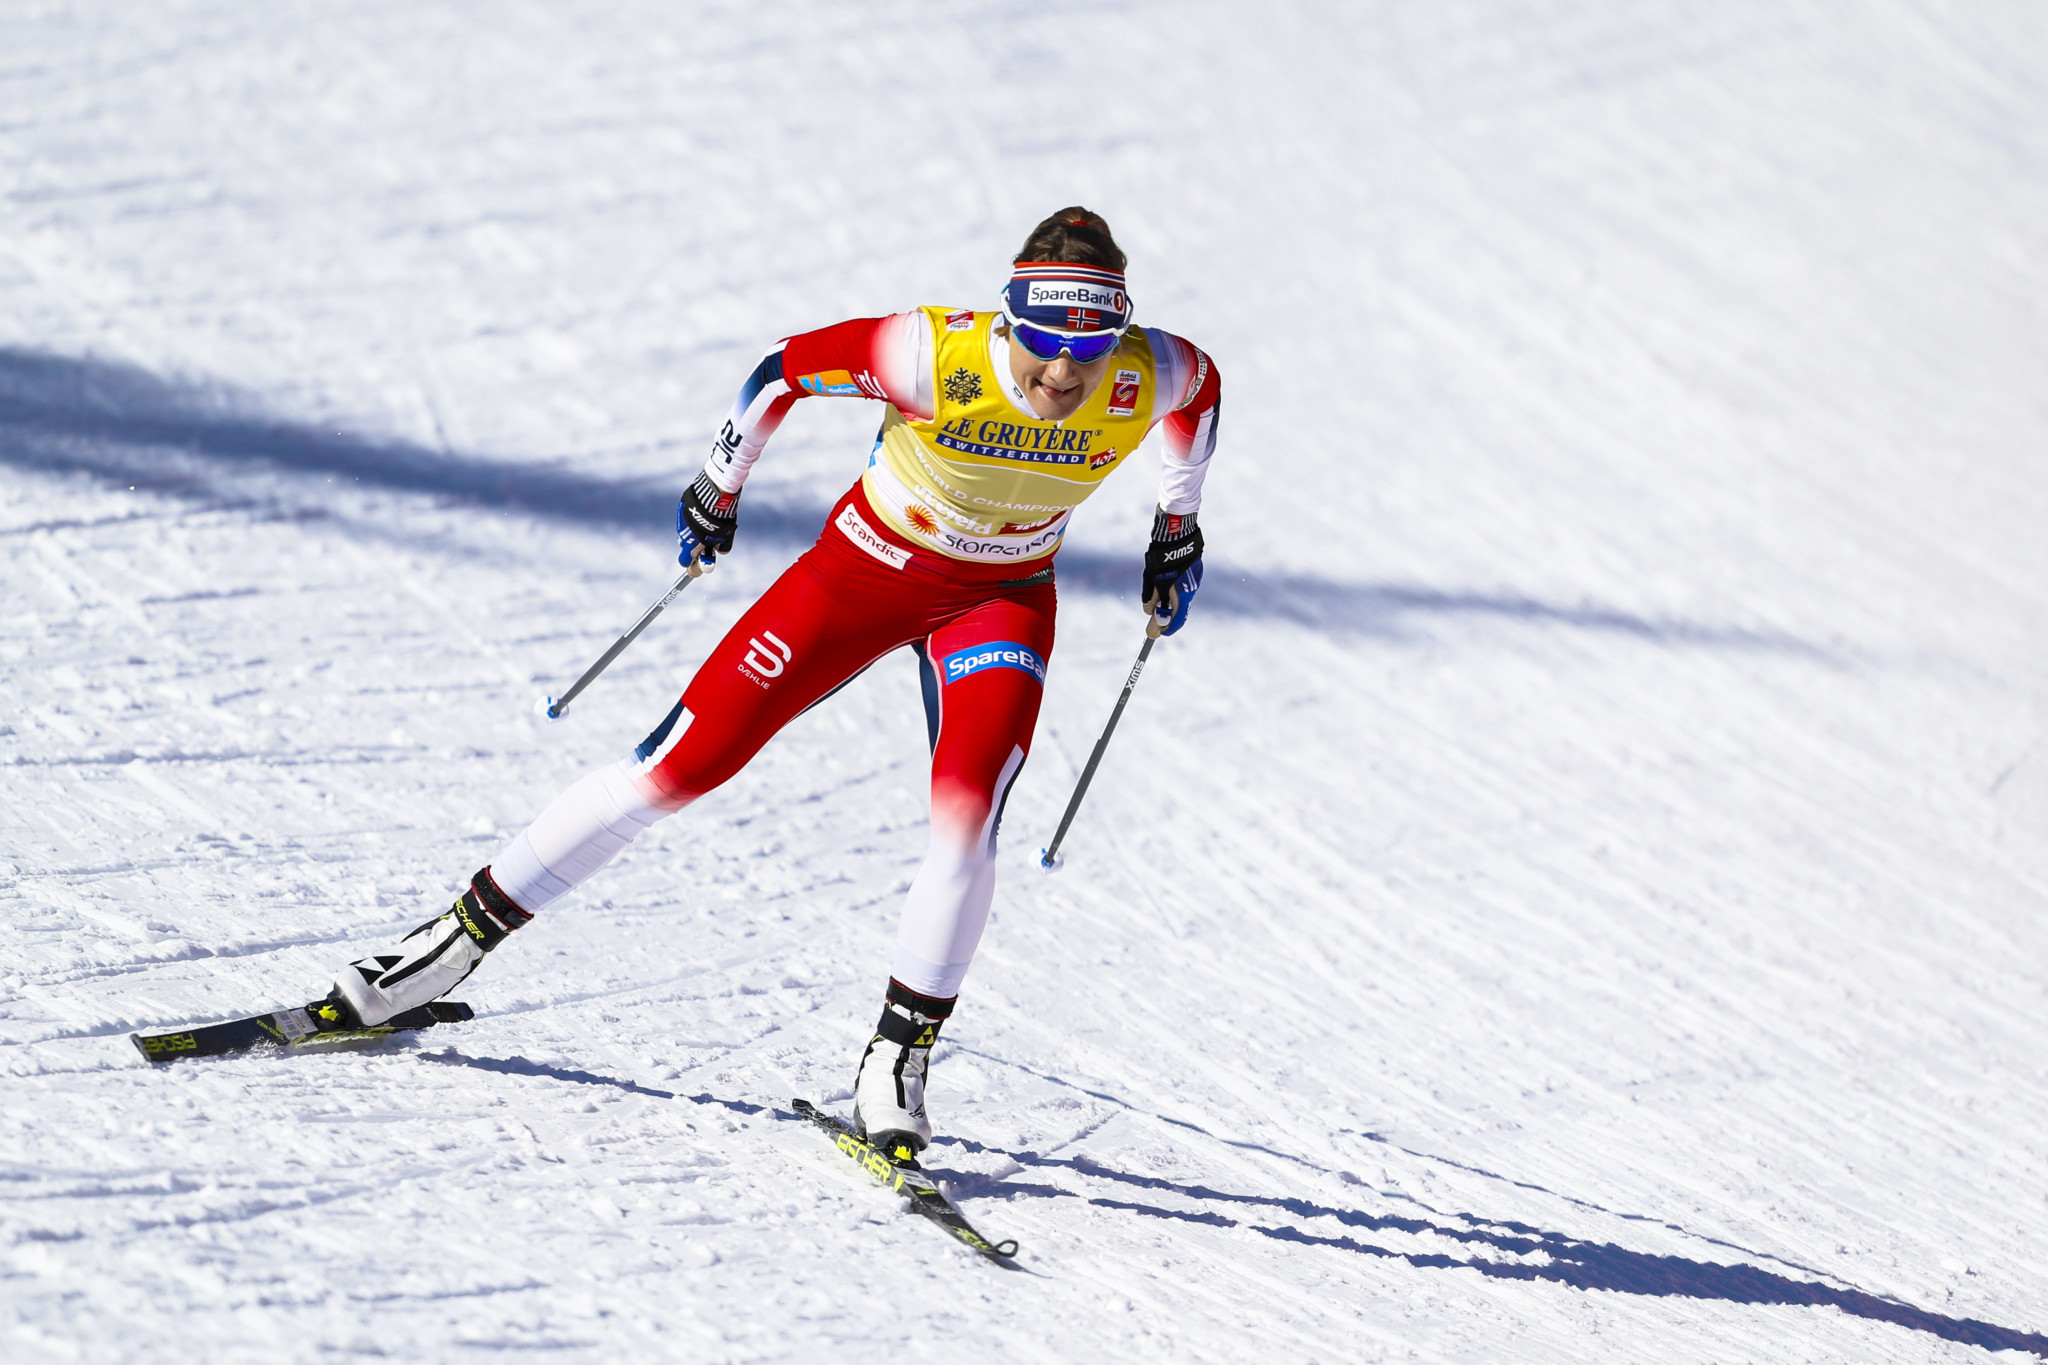 Home triumphs for Falla and Klaebo in FIS Cross Country World Cup sprints at Drammen